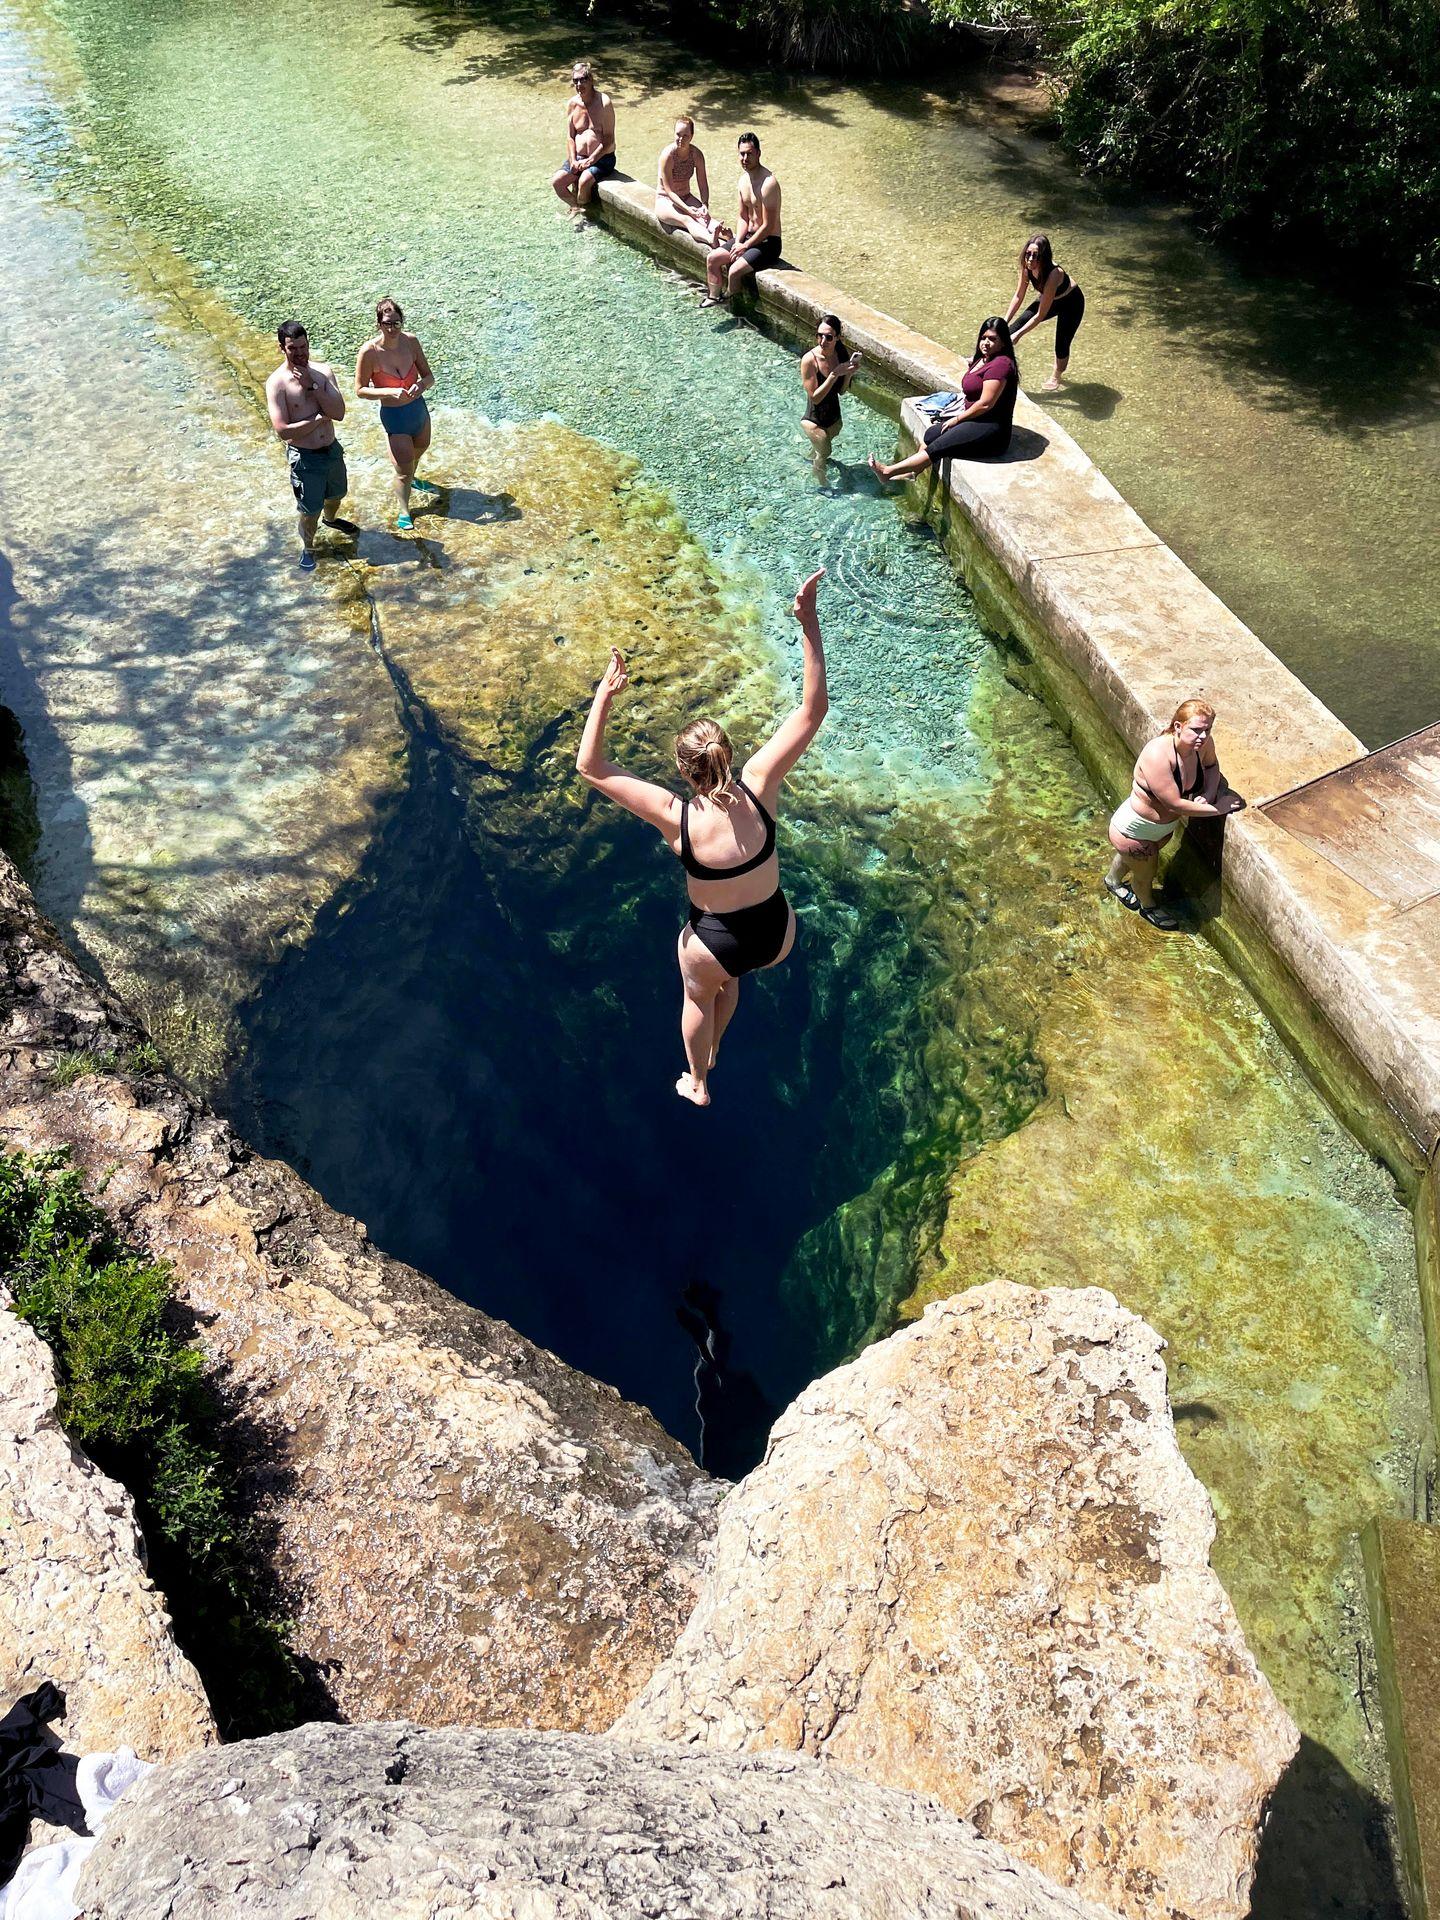 A view from above of Lydia jumping into Jacob's Well. The water is very clear and you can see the underground cave. A few people stand in the shallow water near the well.